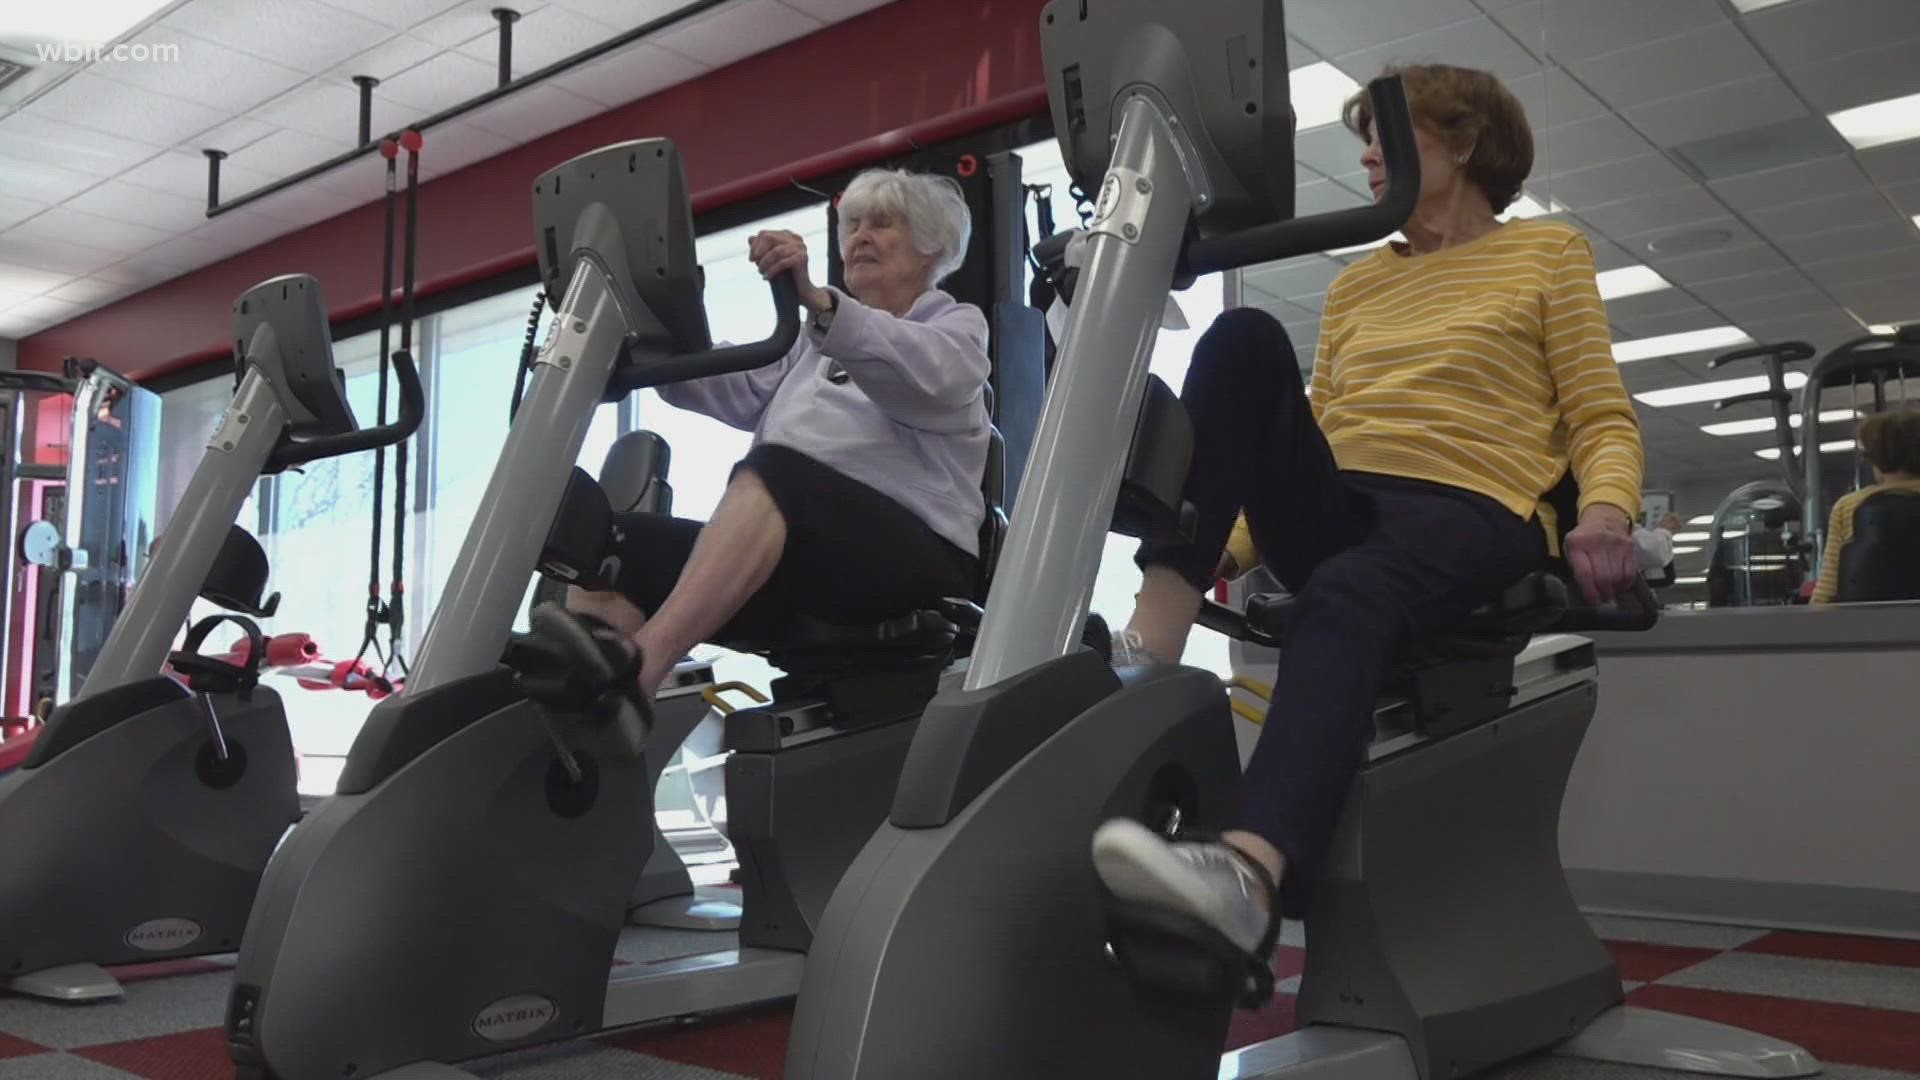 We all know exercise is key to leading a long and healthy life, but the majority of older Americans don't get enough of it.